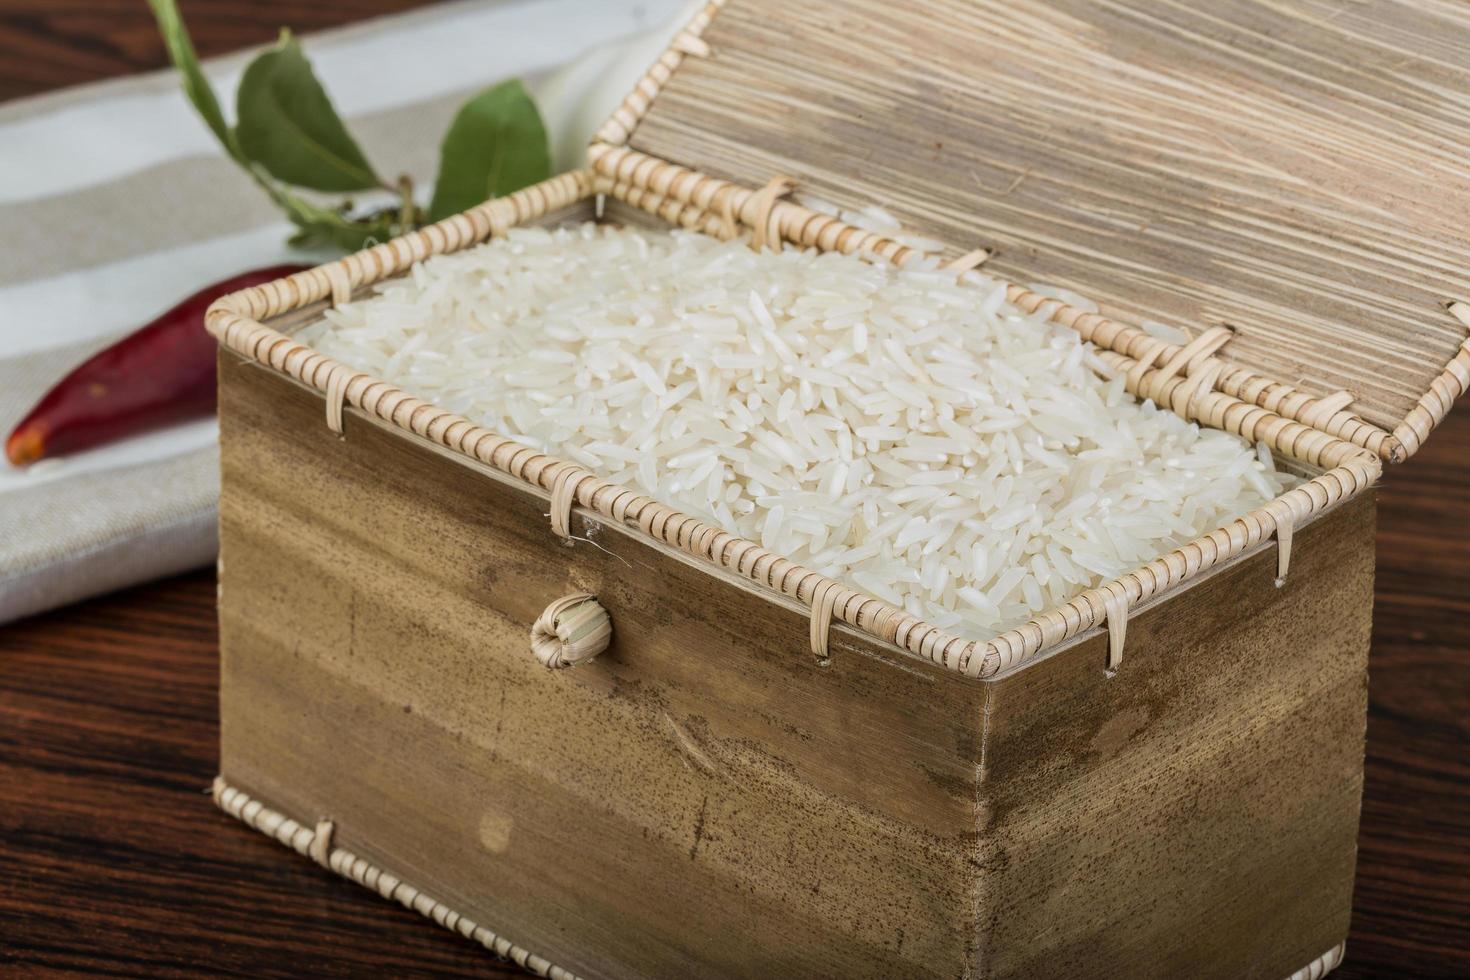 Basmati rice in a basket on wooden background photo